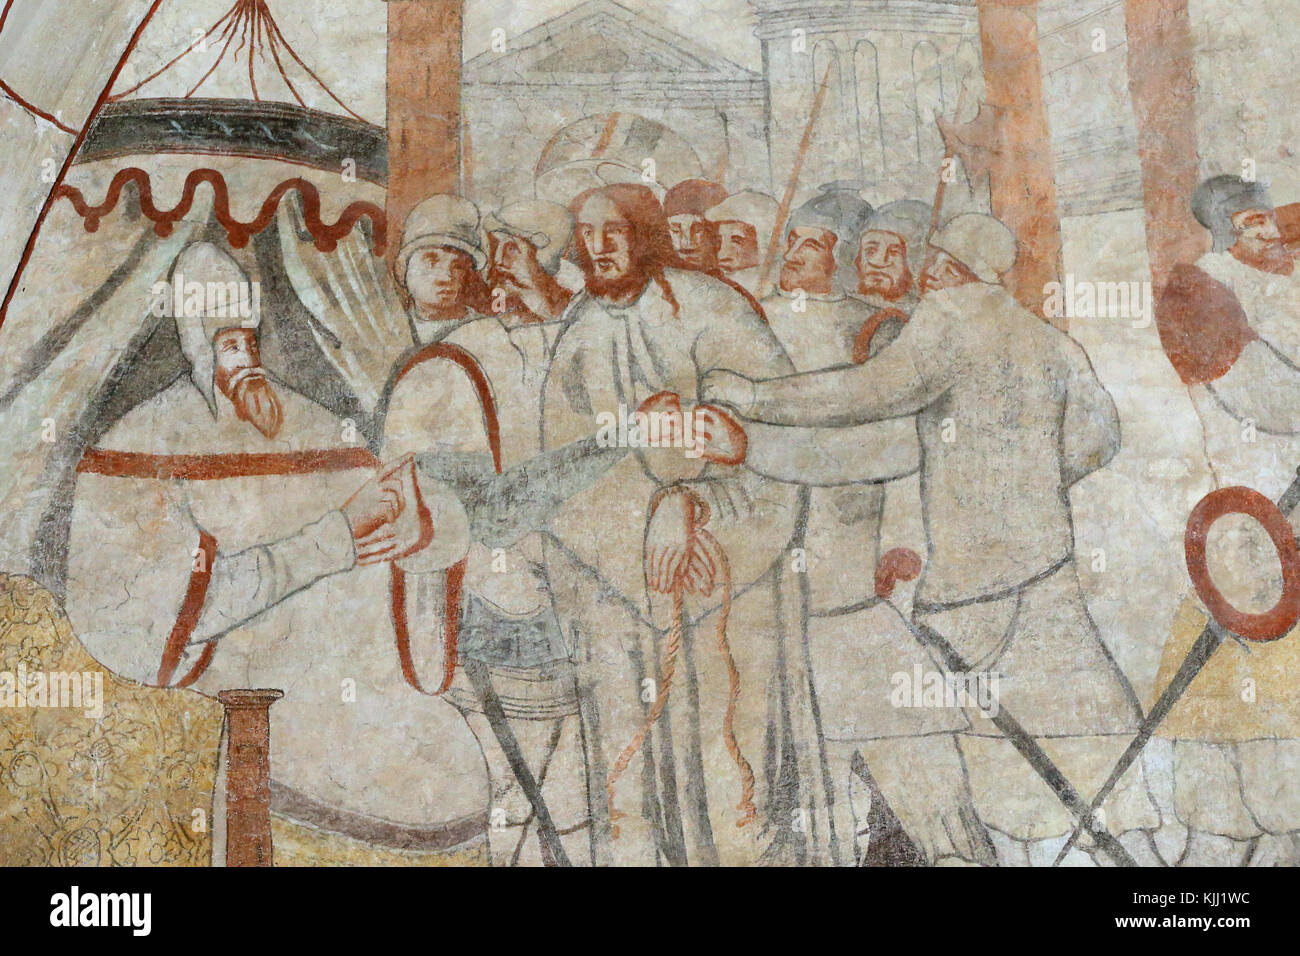 Vault de Lugny church.  16th century wall painting. Christ in his passion. Christ before Pilate.  France. Stock Photo